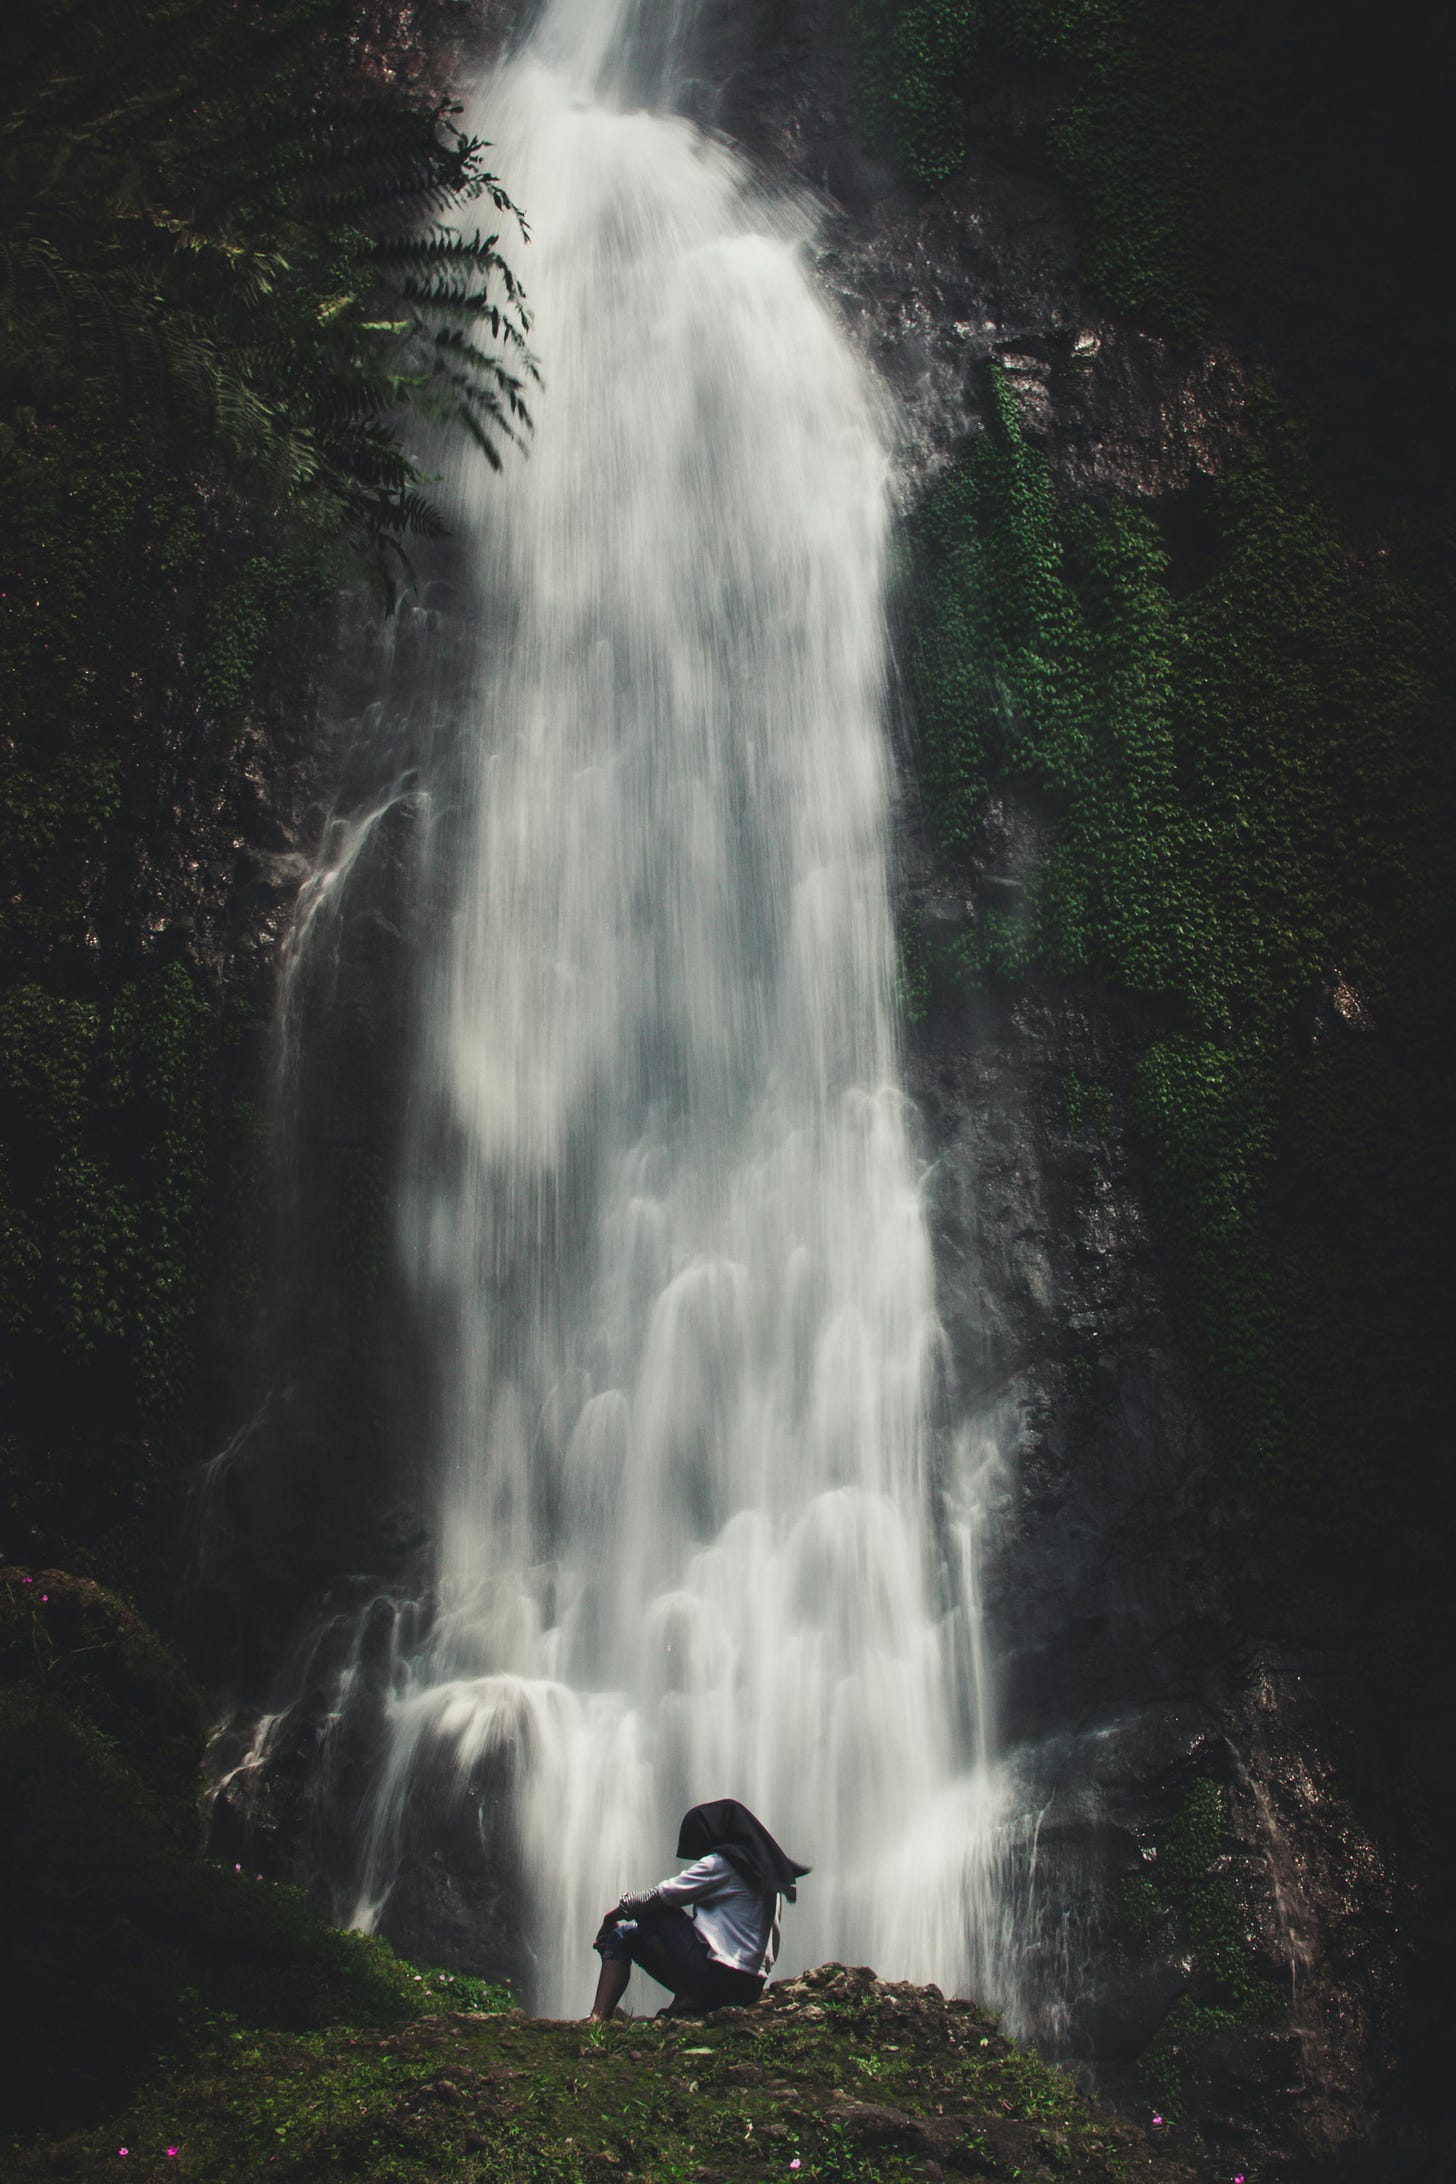 Person sitting at the foot of a large waterfall in a rainforest